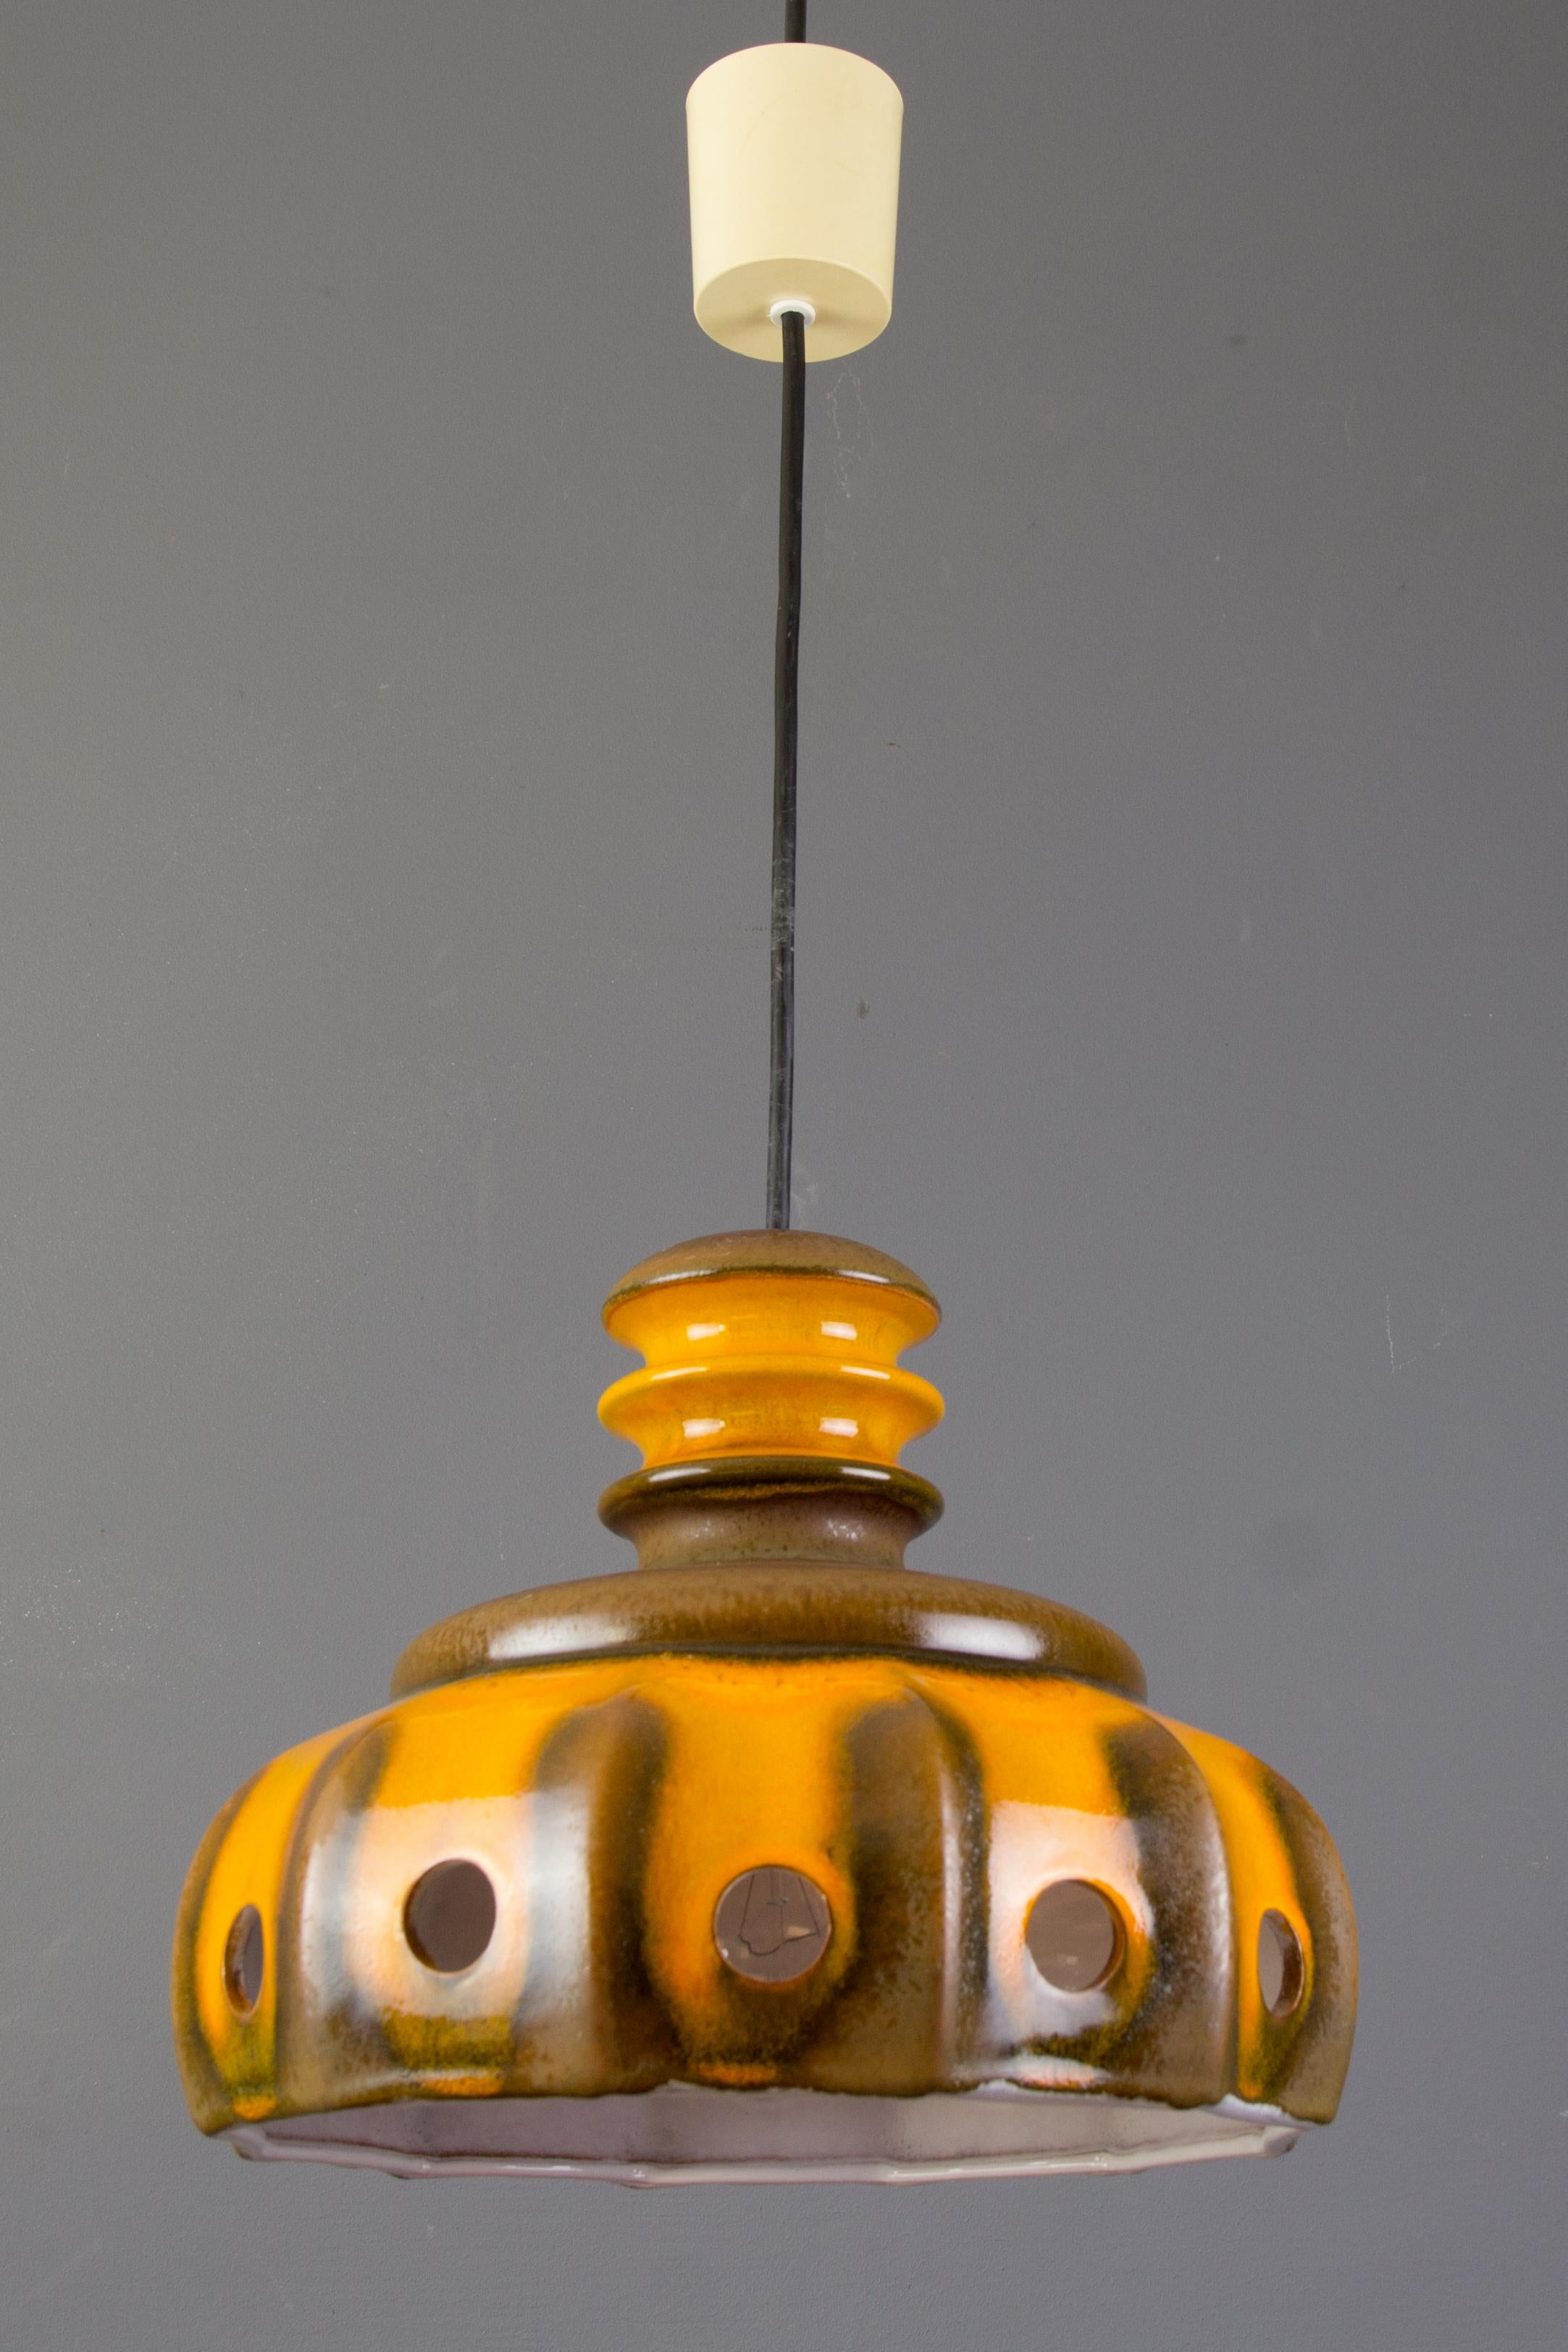 Colorful orange and brown German ceramic Fat Lava or West German Pottery pendant ceiling light, glazed outside and inside. The light comes through the circles creating wonderful shadows upon the wall. Adjustable height and one socket for E27 light